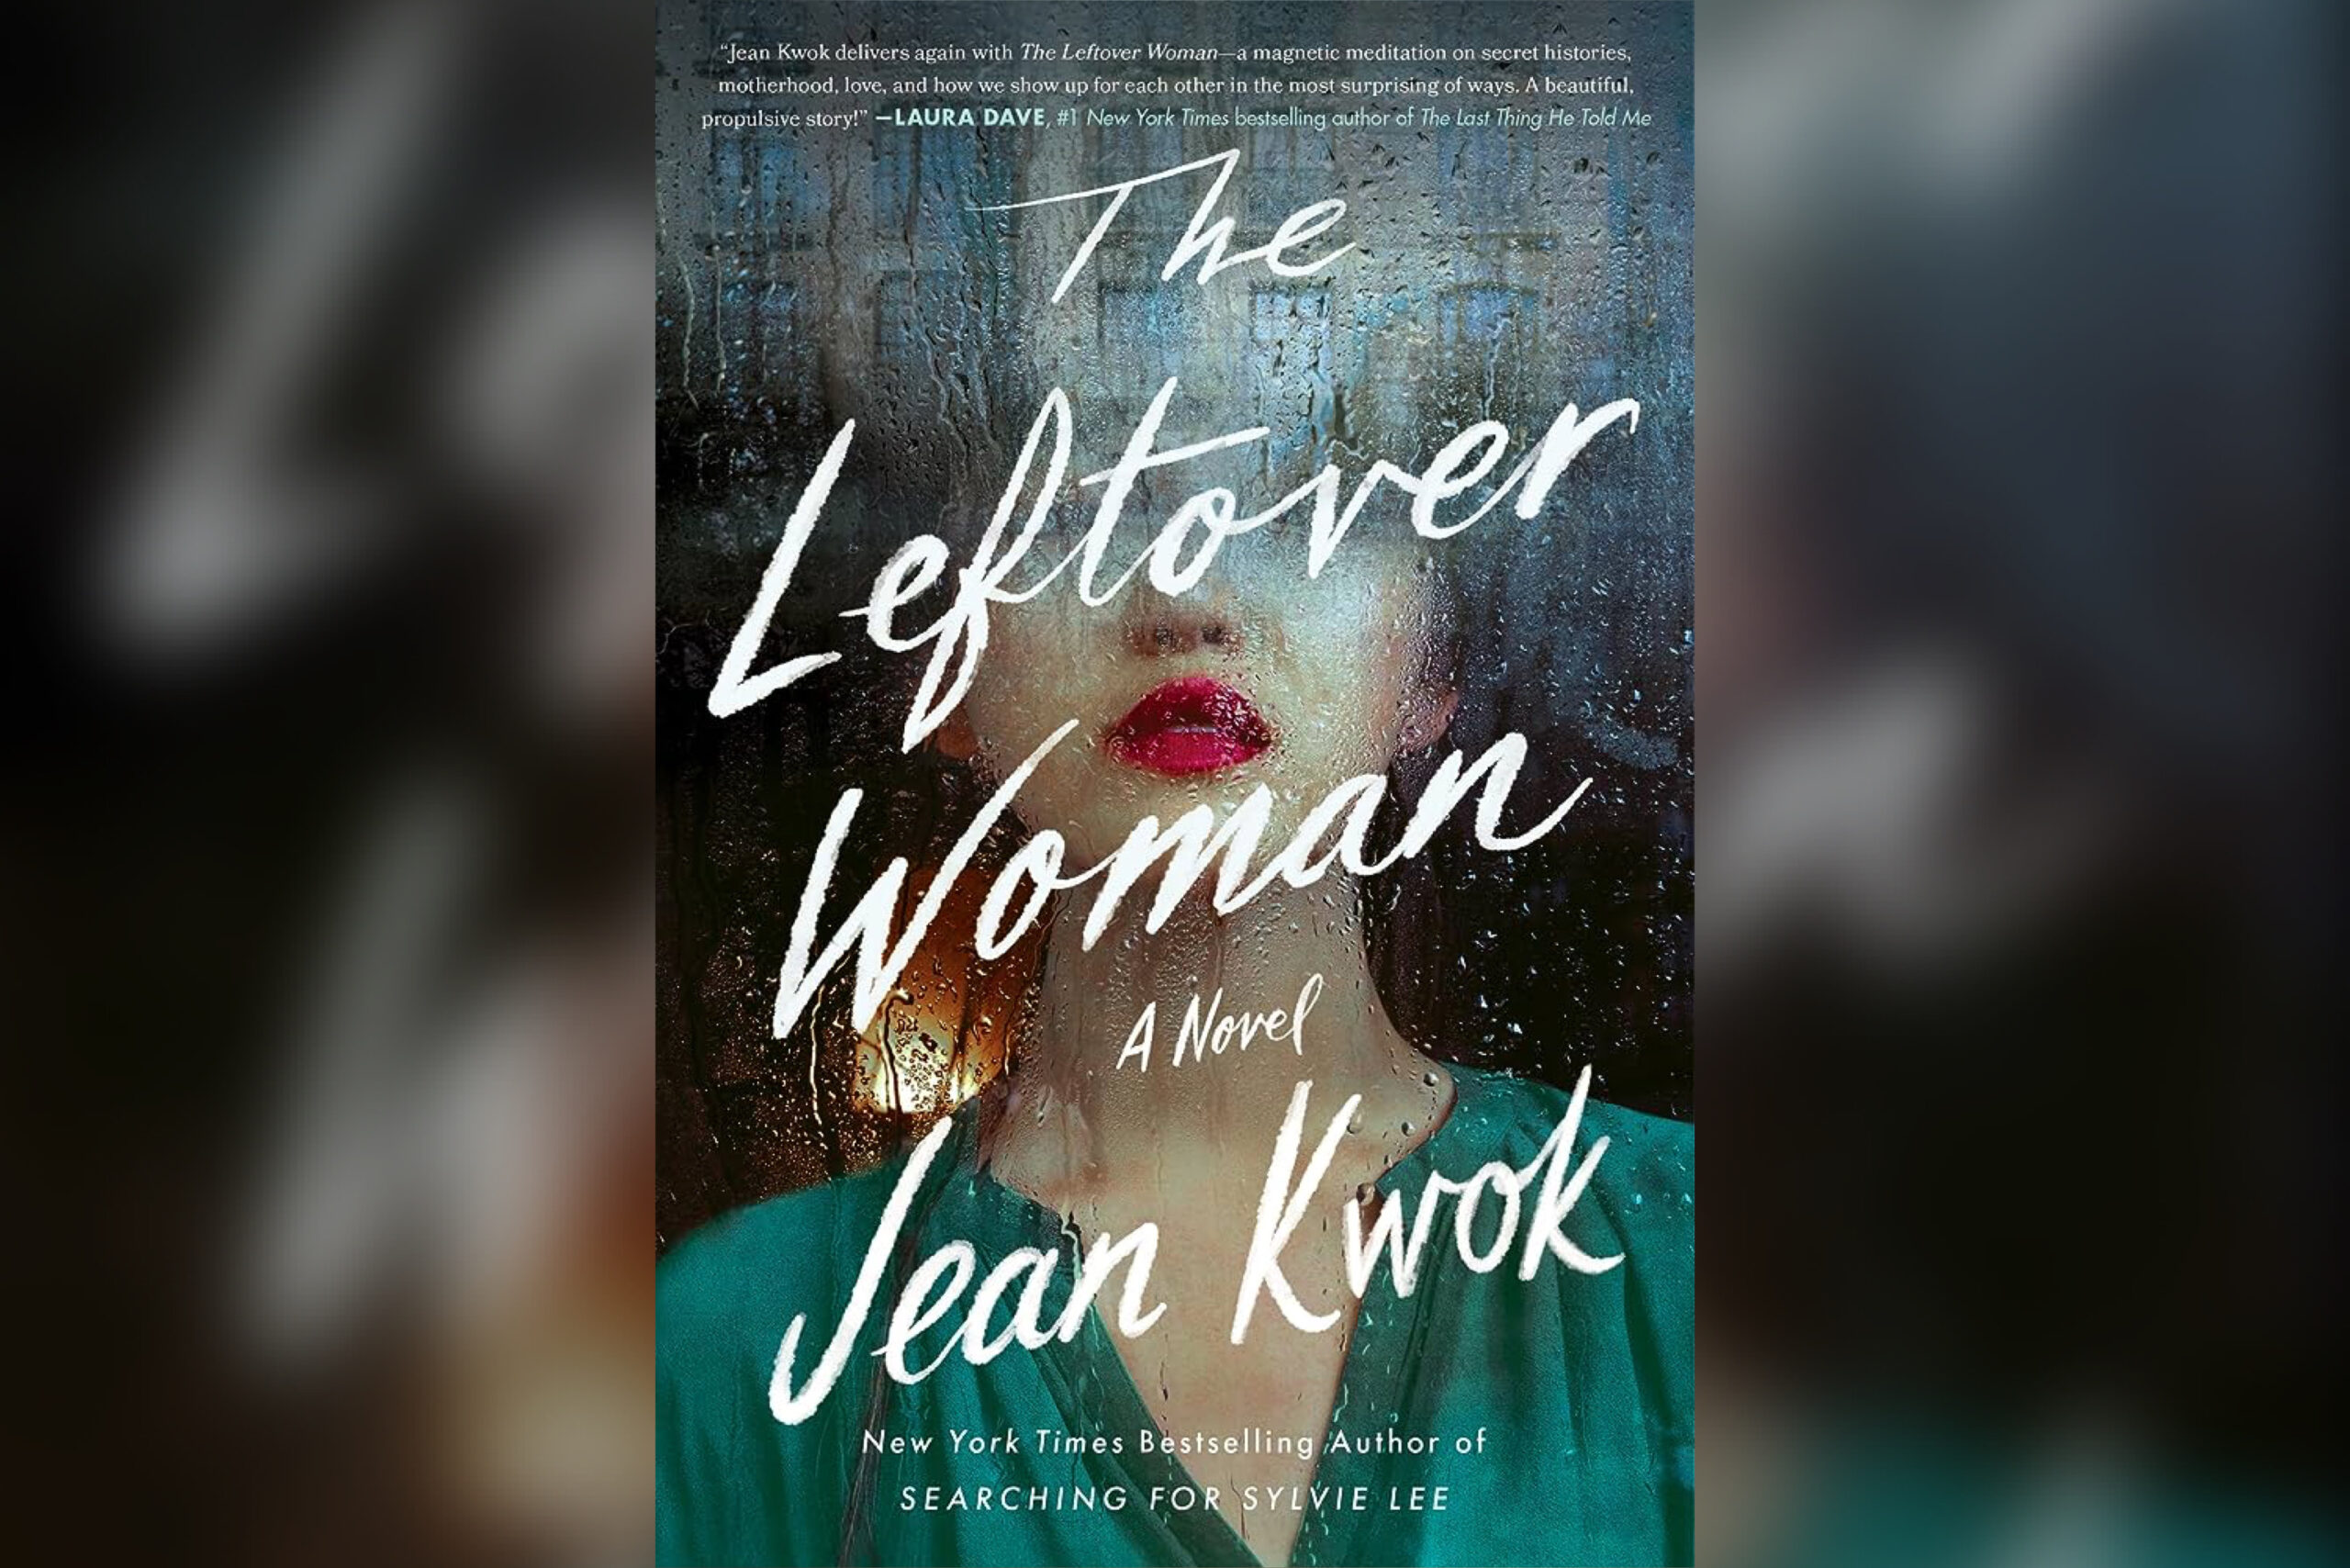 Review: The Leftover Woman by Jean Kwok